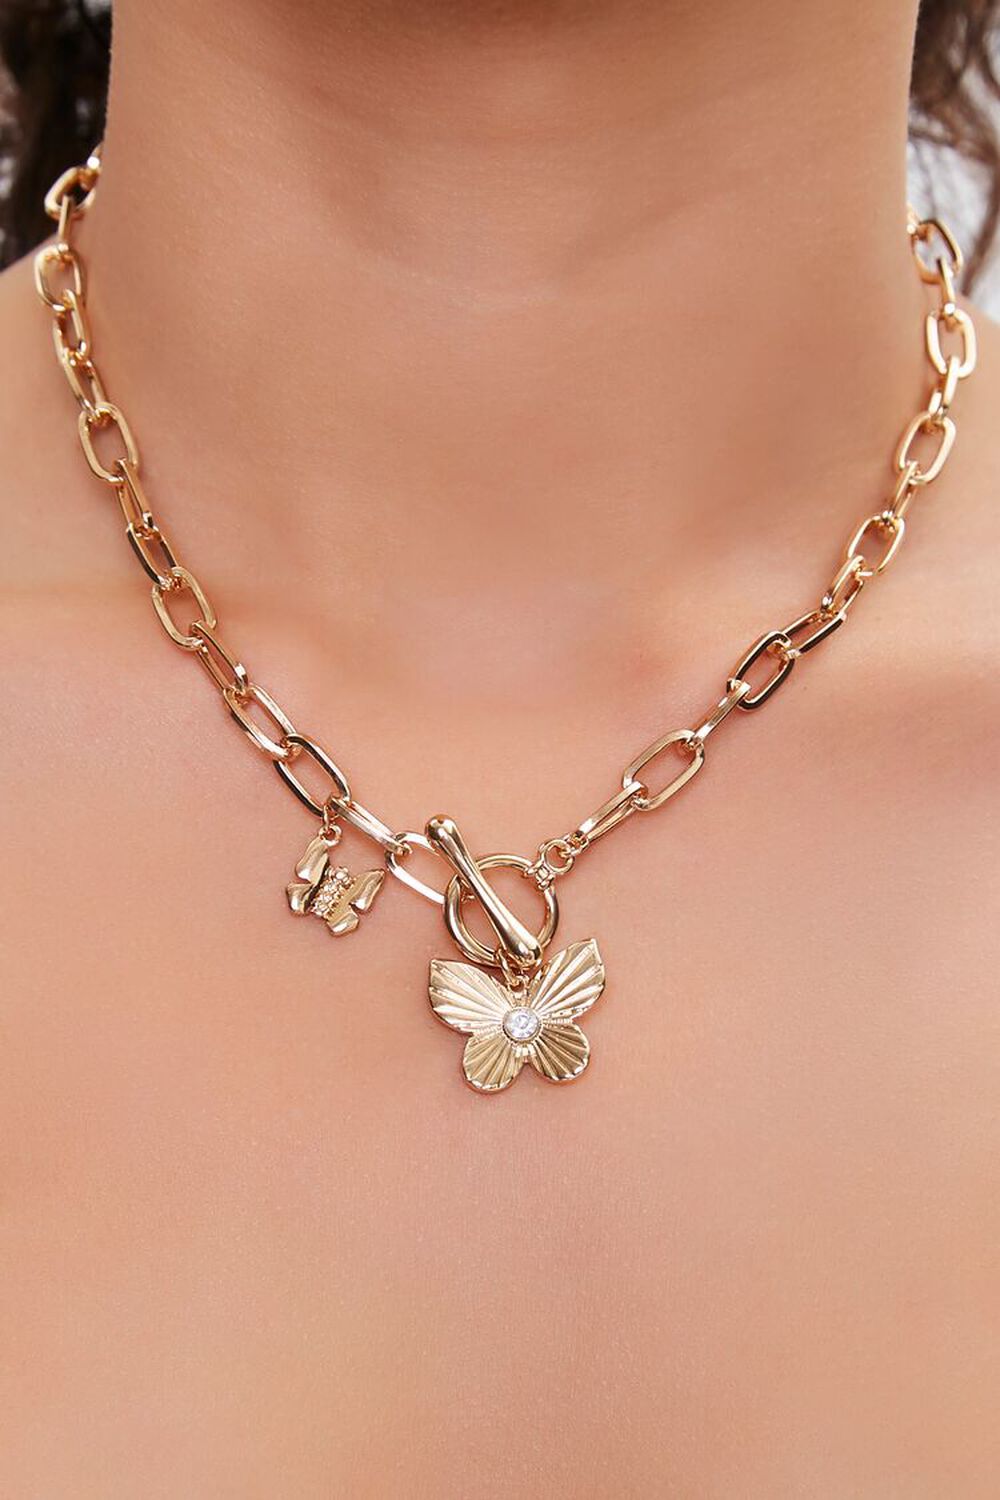 GOLD Butterfly Toggle Chain Necklace, image 1